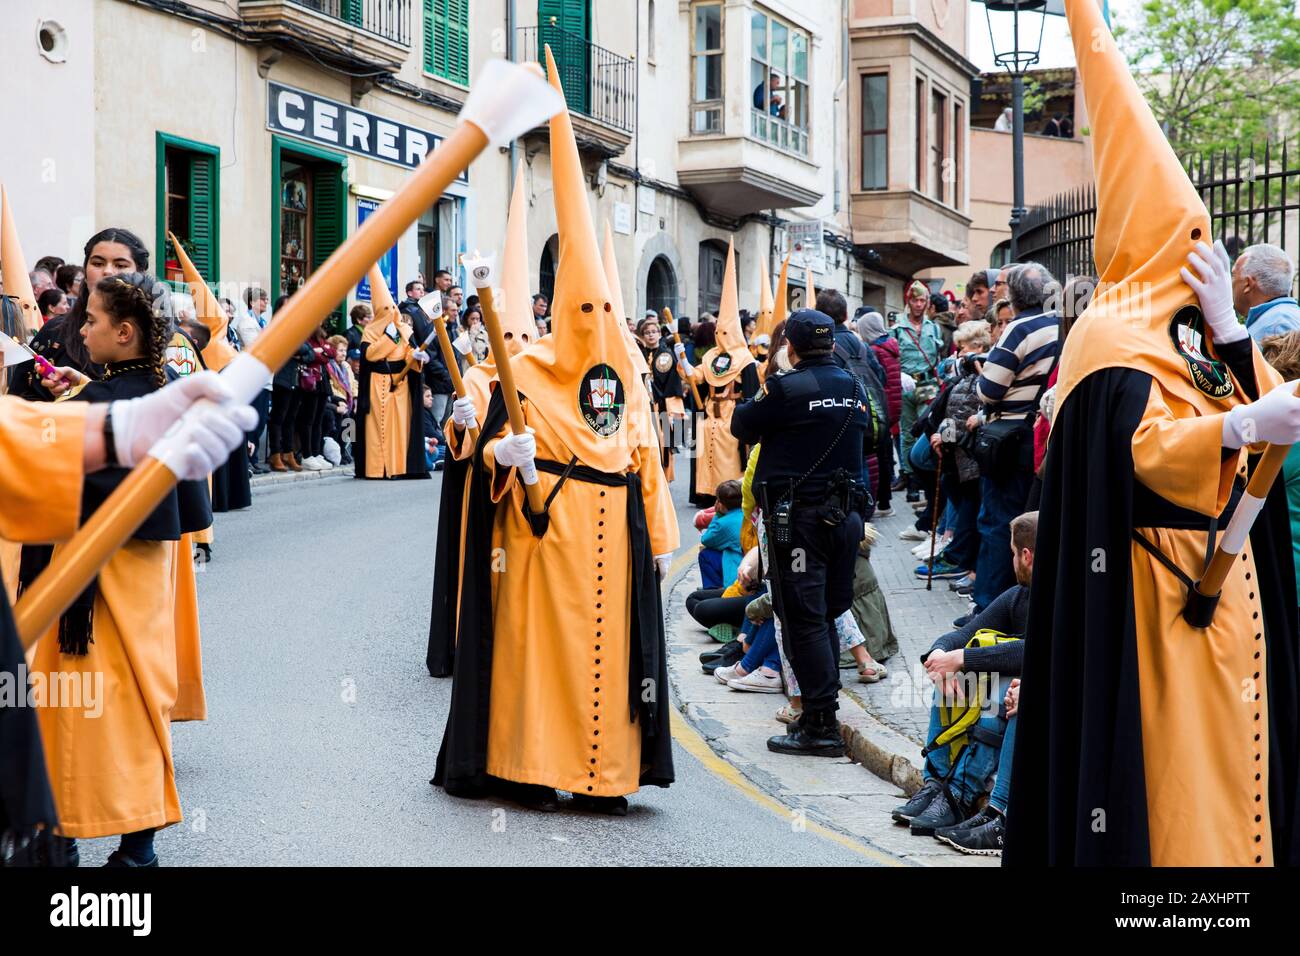 Holy Thursday procession of church brotherhood penitents in conical hoods and robes of different colours carrying religious statues Stock Photo